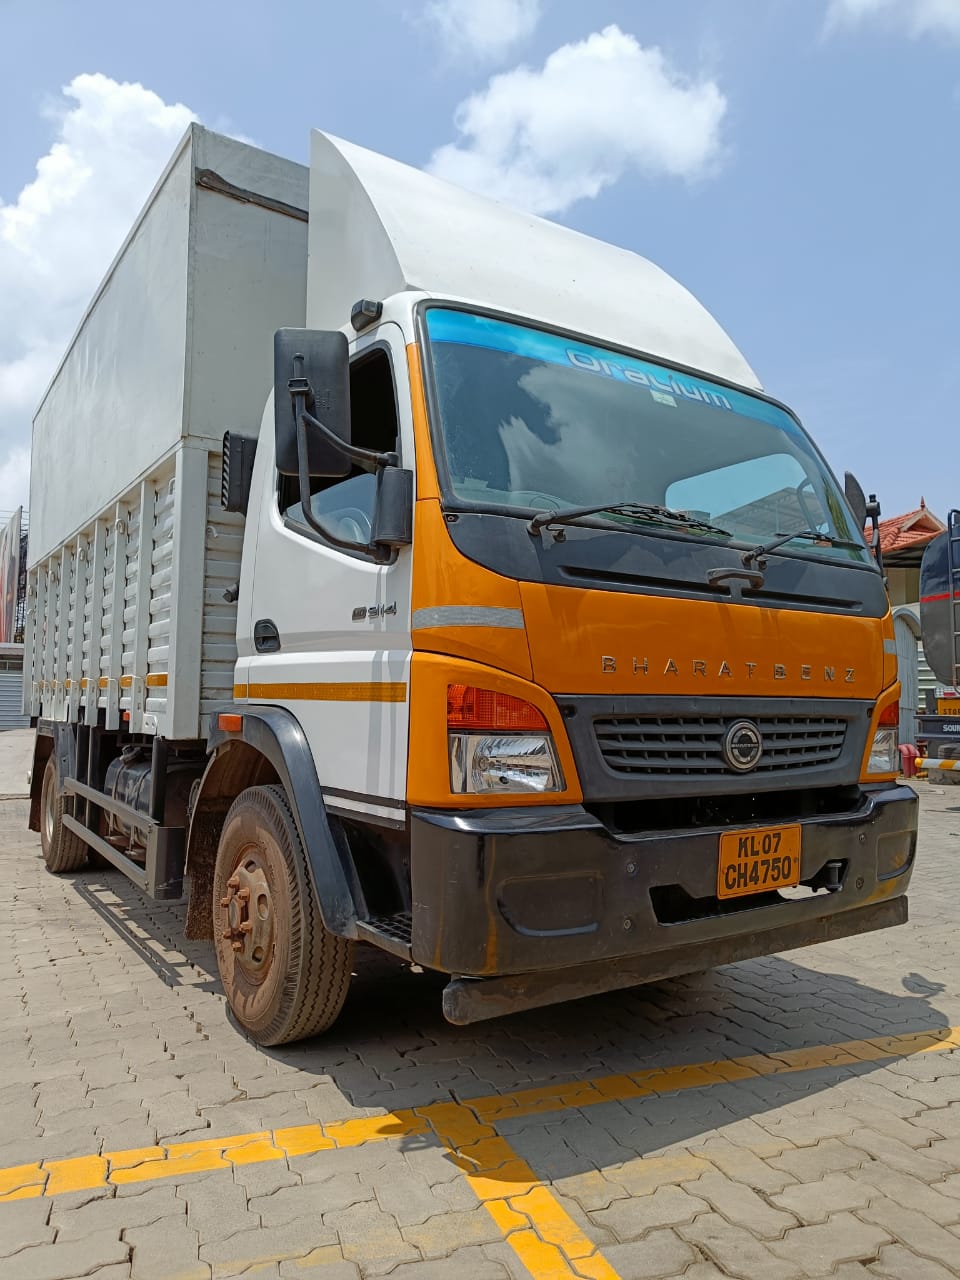 Used Bharatbenz Sale in Kerala